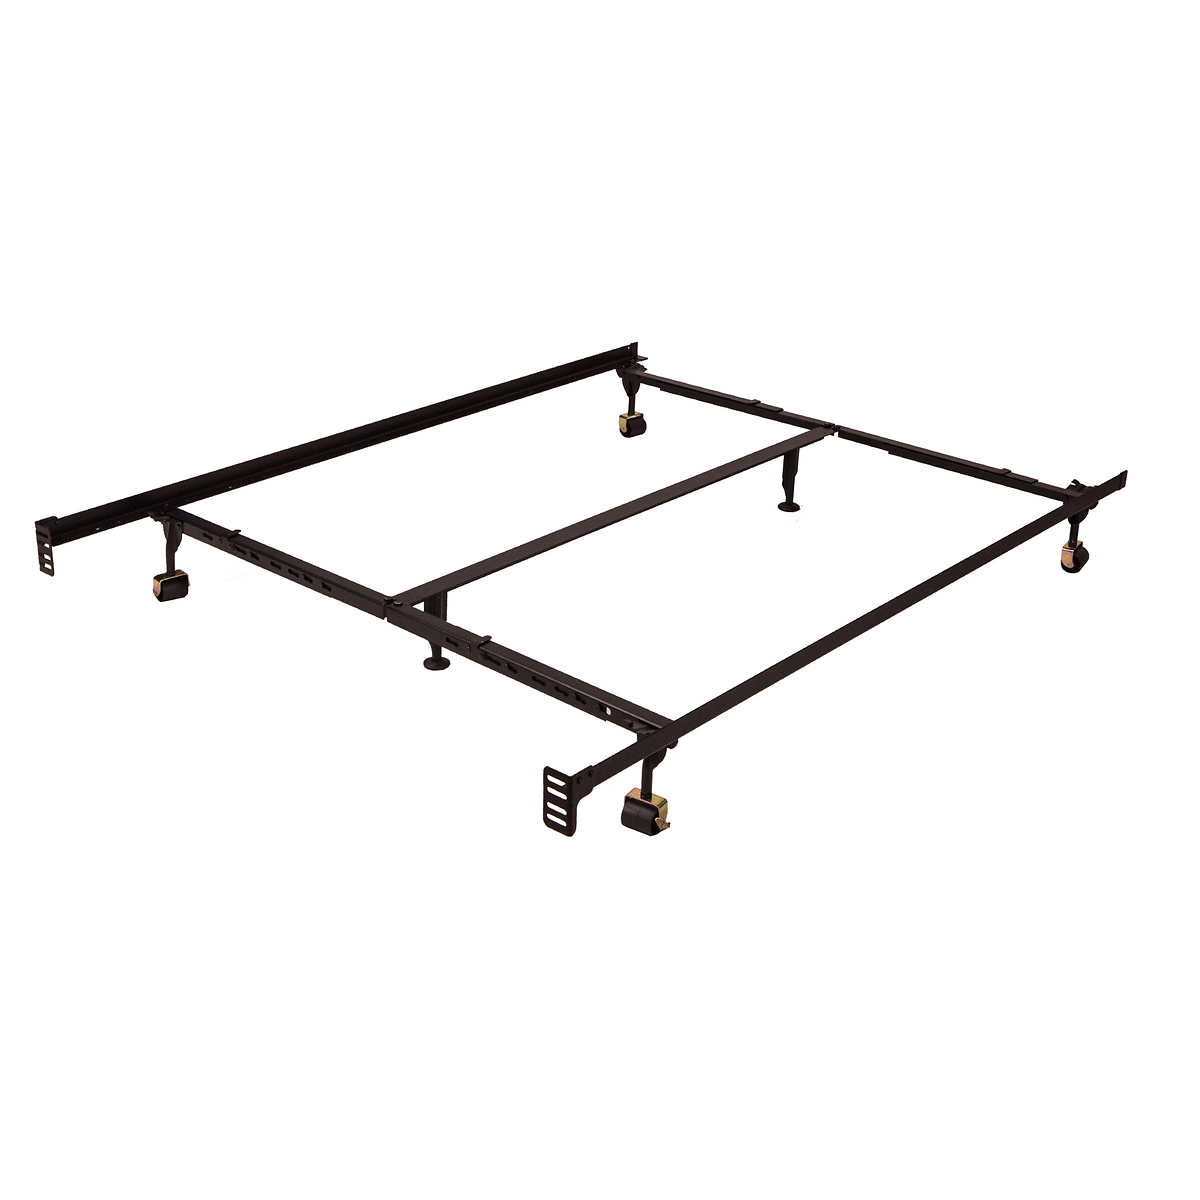 Premium Universal Lev R Lock Bed Frame, Heavy Duty Metal Bed Frame Cal King Size